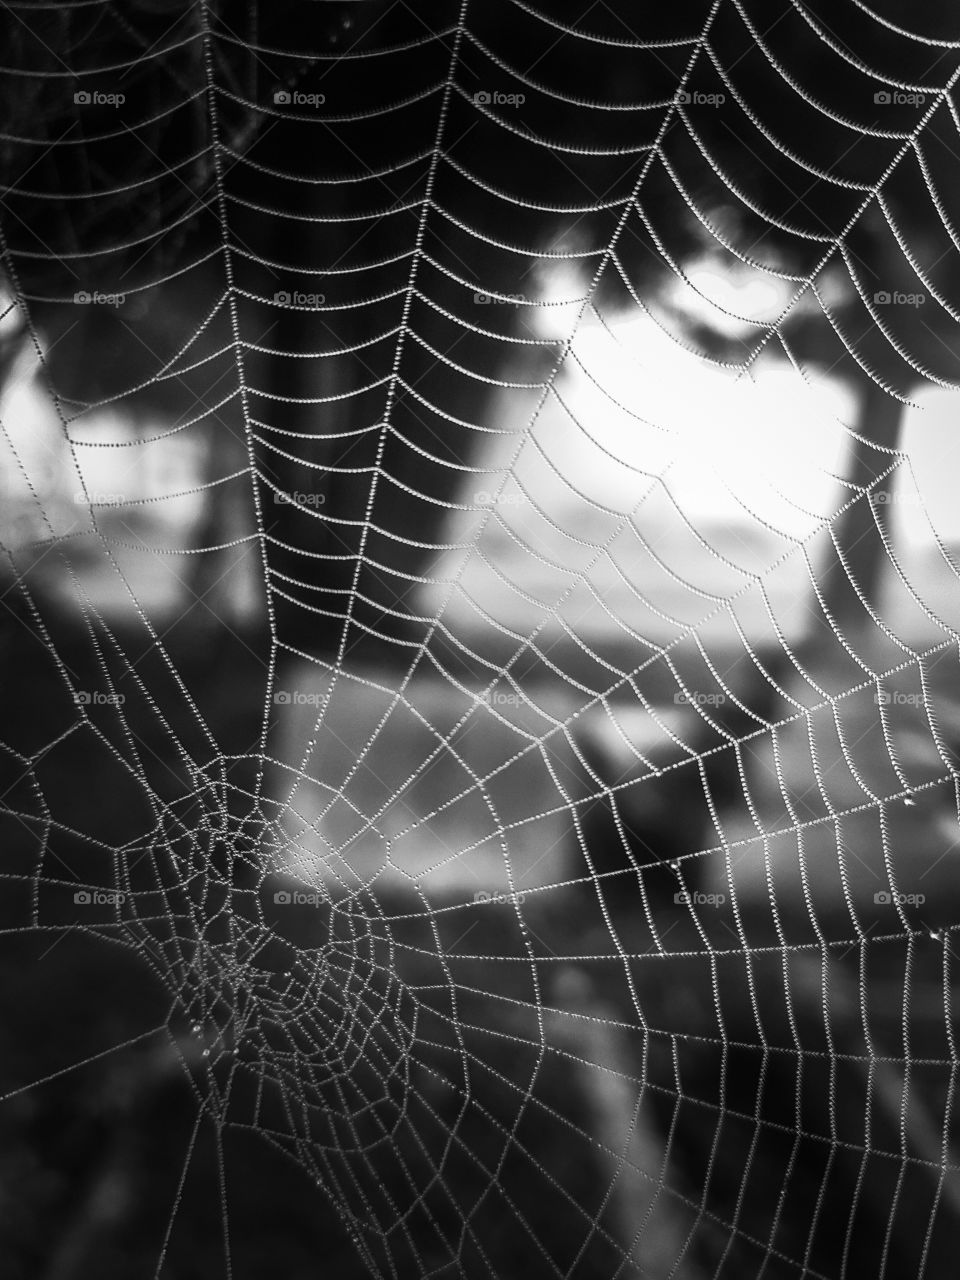 spider's web in a grave yard